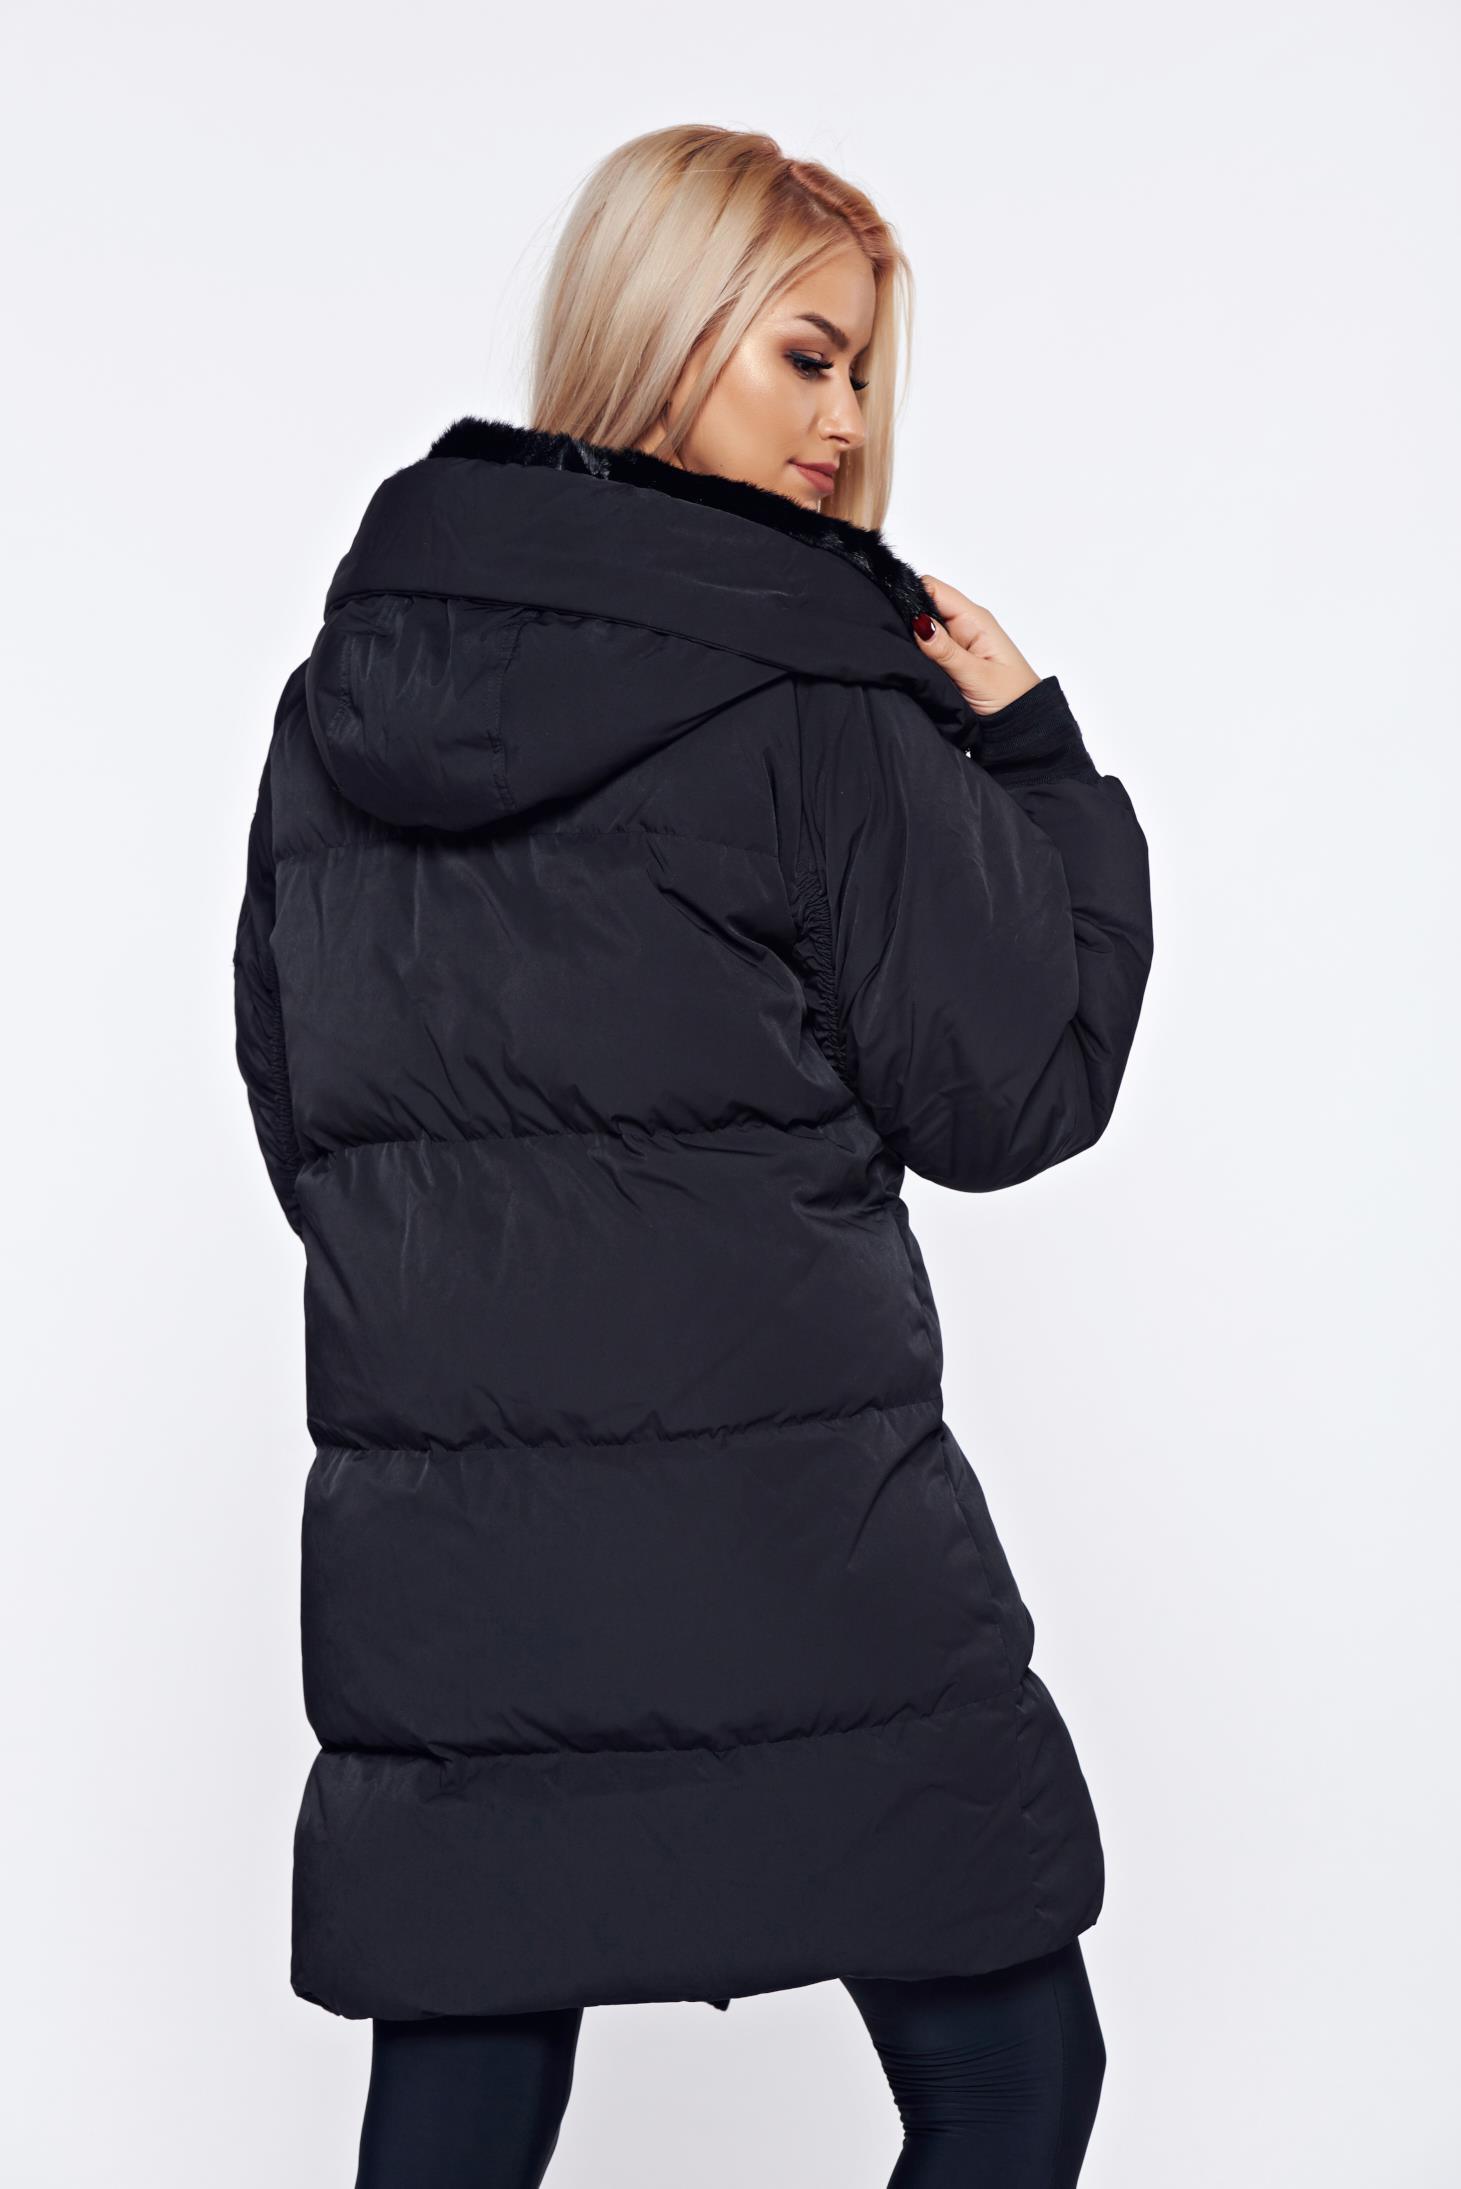 Adidas black casual jacket from slicker with furry hood